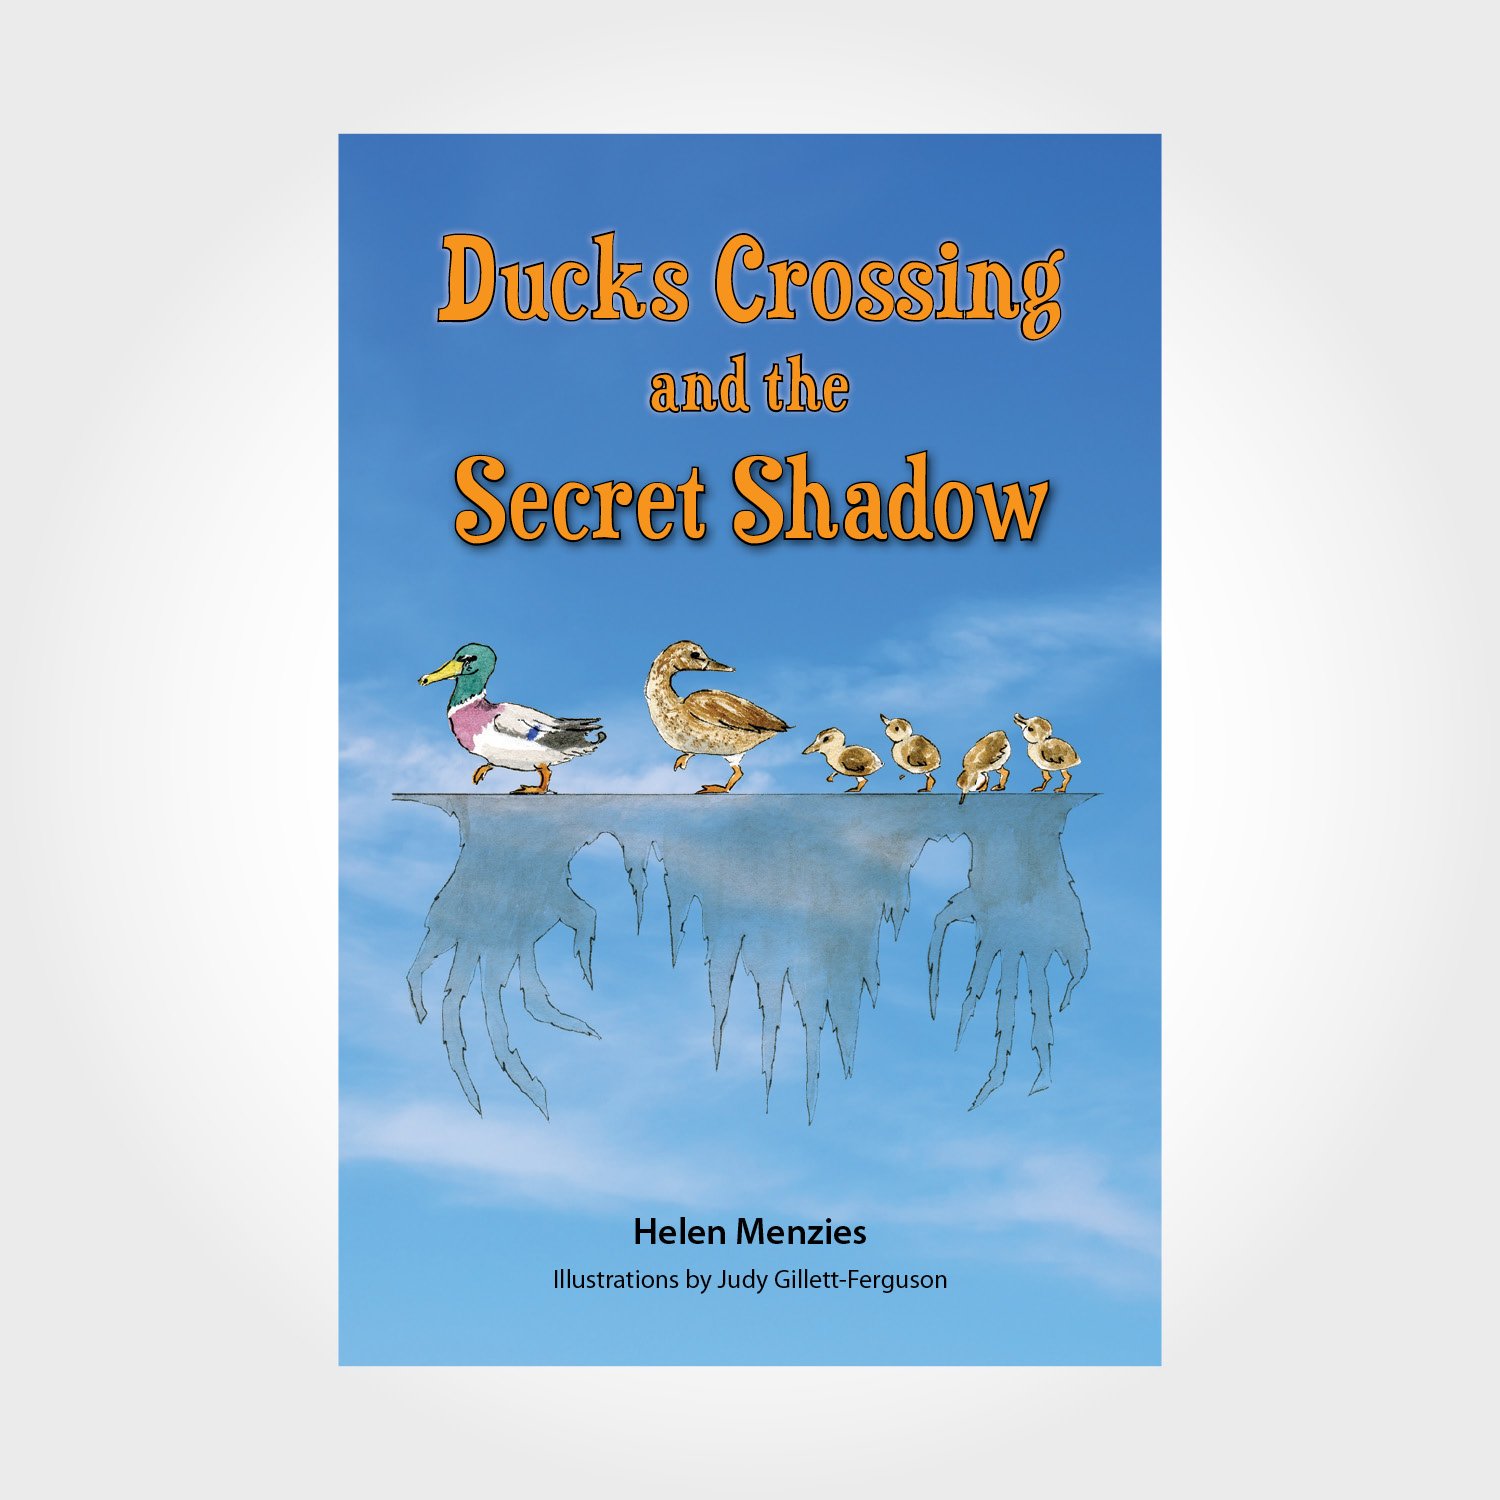 Ducks Crossing and the Secret Shadow